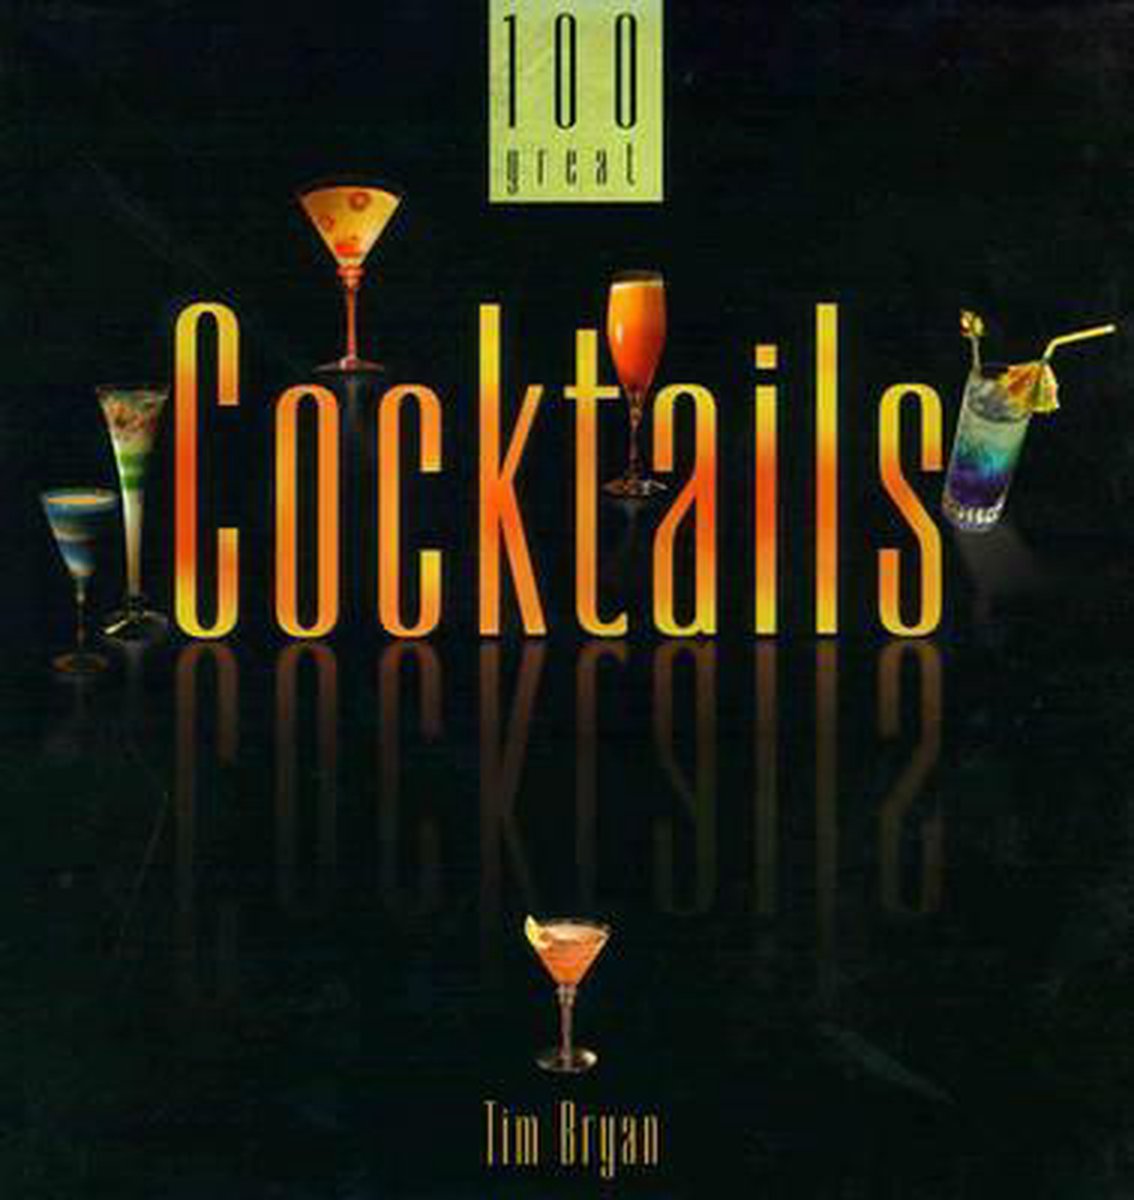 100 Great Cocktails